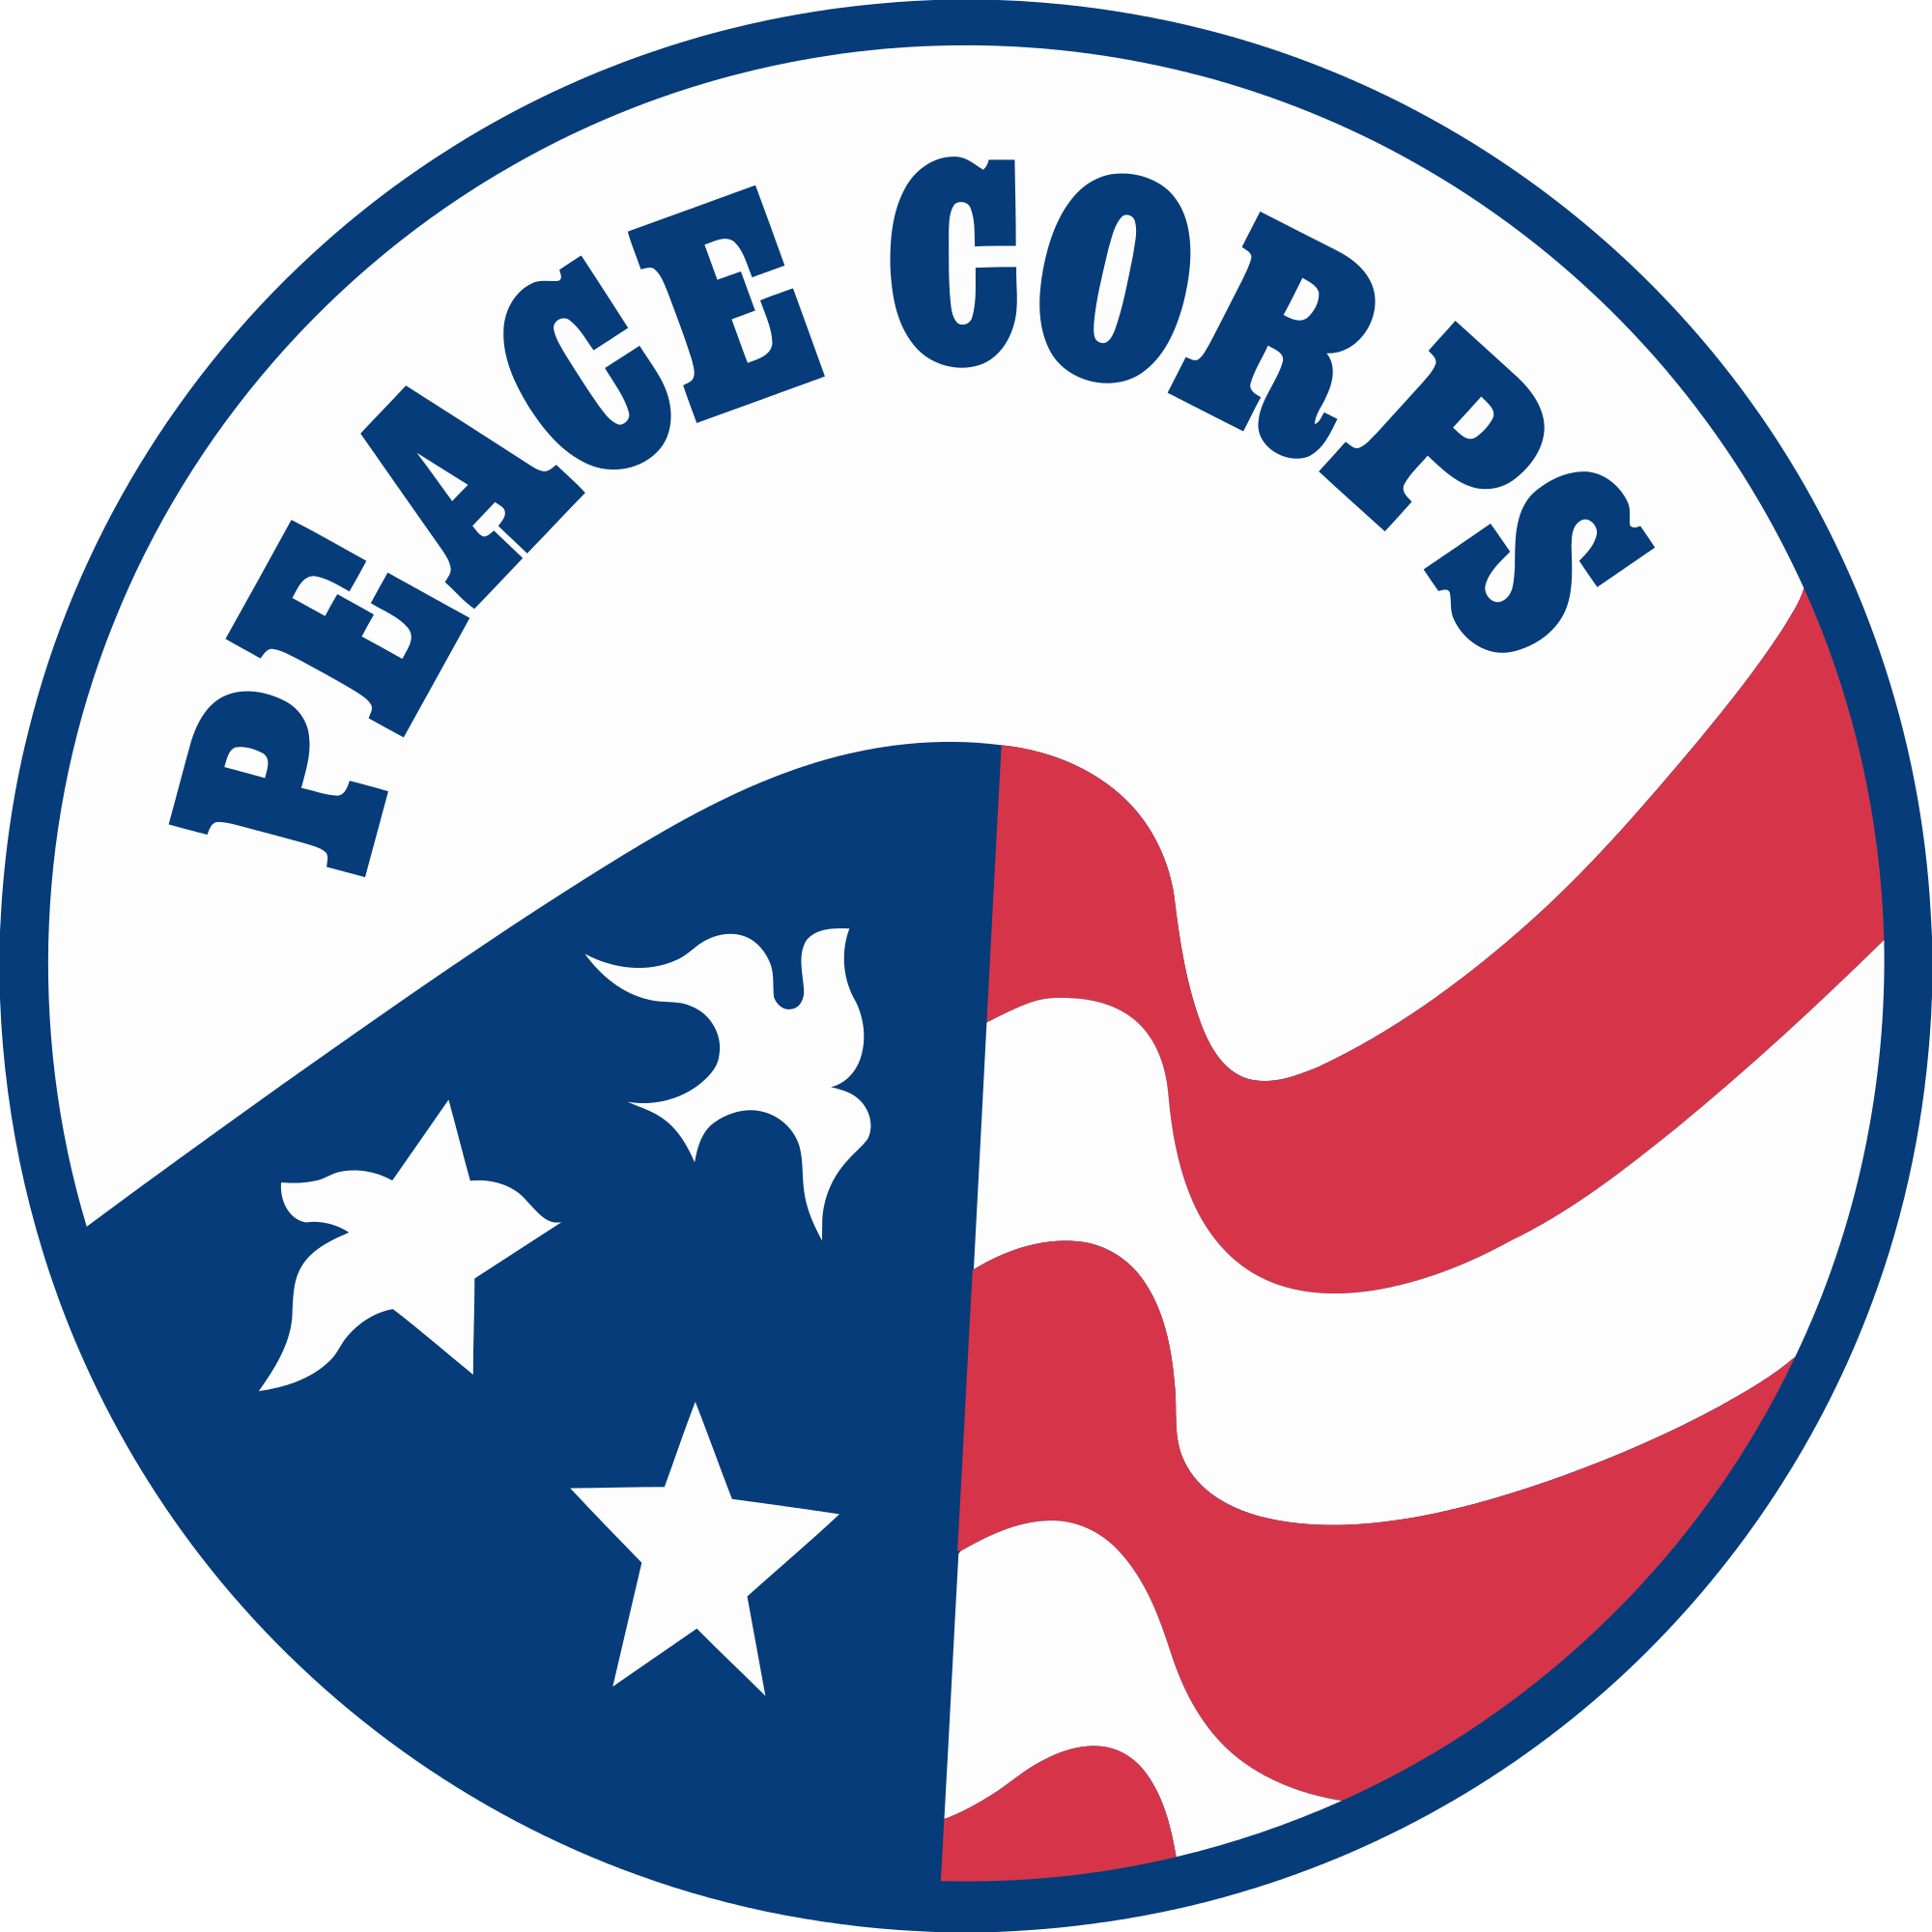 Peace Corps Coverdell Fellows Program